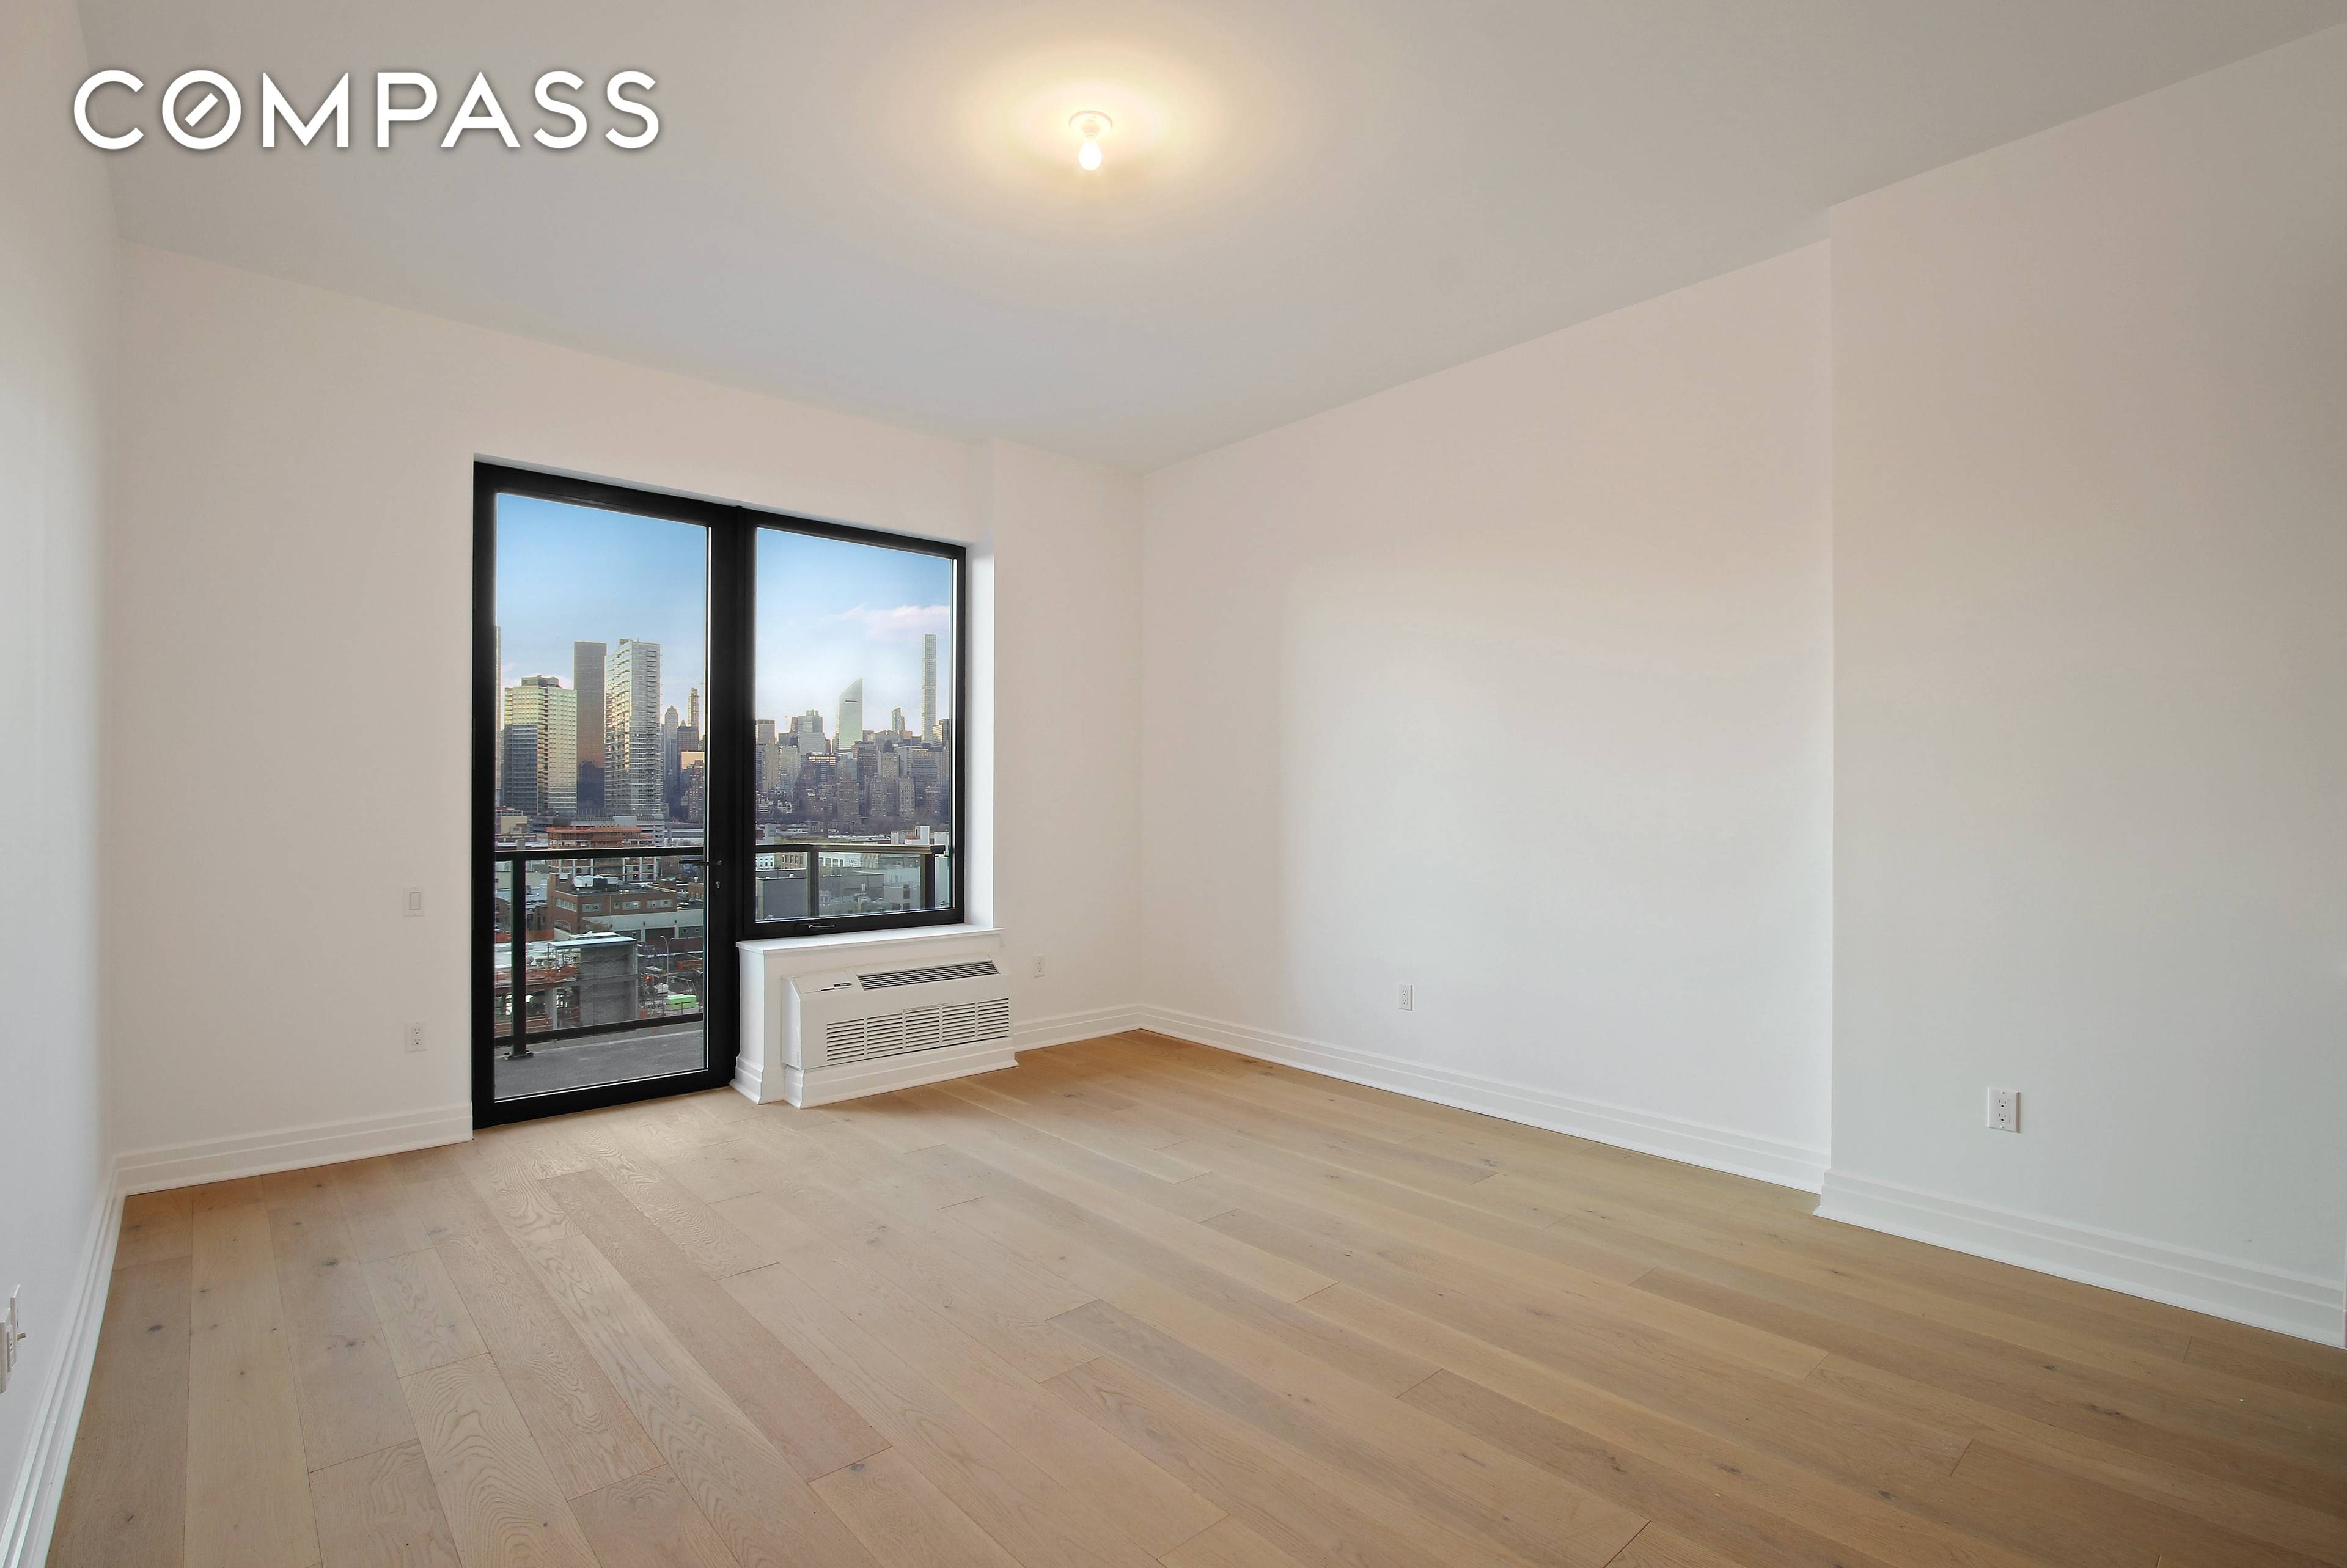 This spectacular home has brilliant sunset views over Manhattan's iconic skyline.